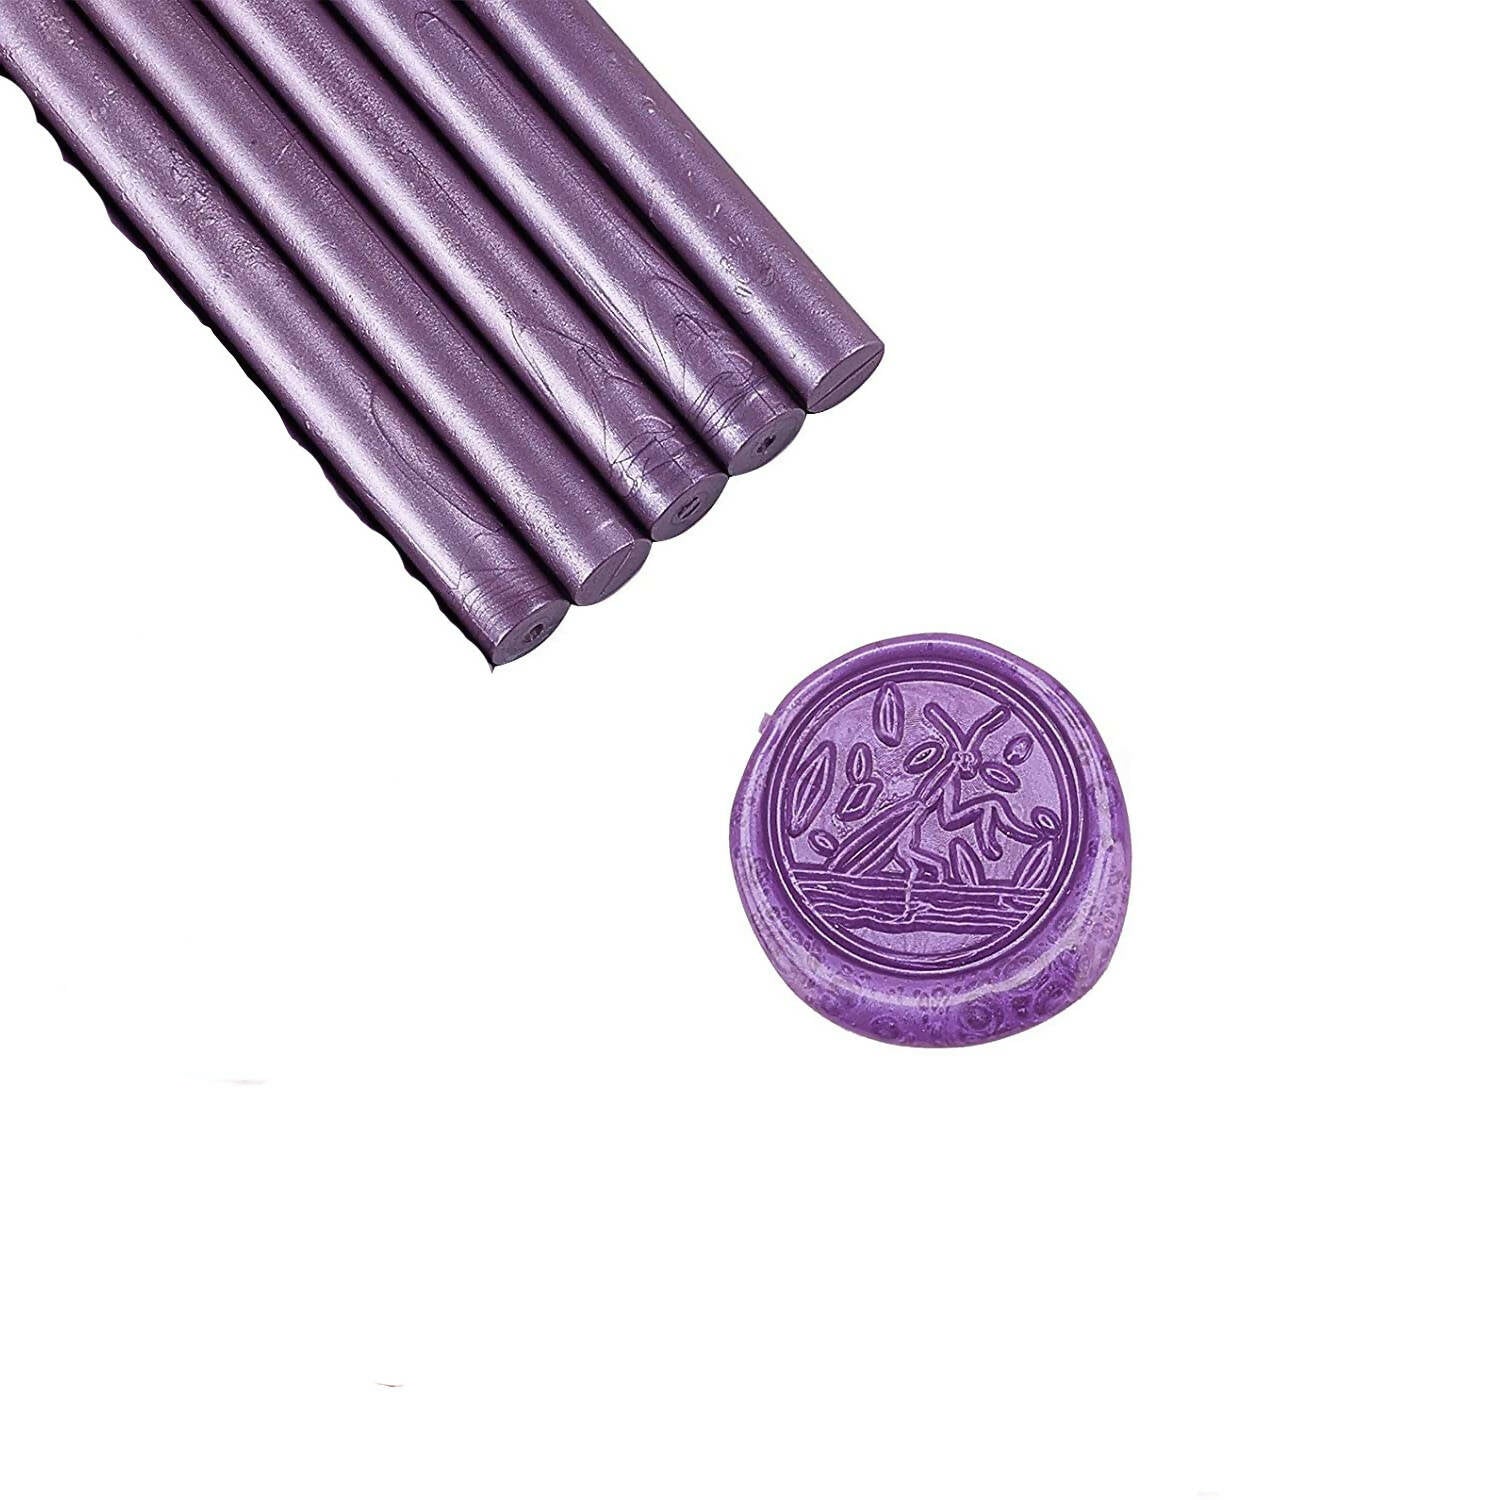 Pack of 5 - Glue Sealing Wax Sticks for Wax Seal Stamp - Purple